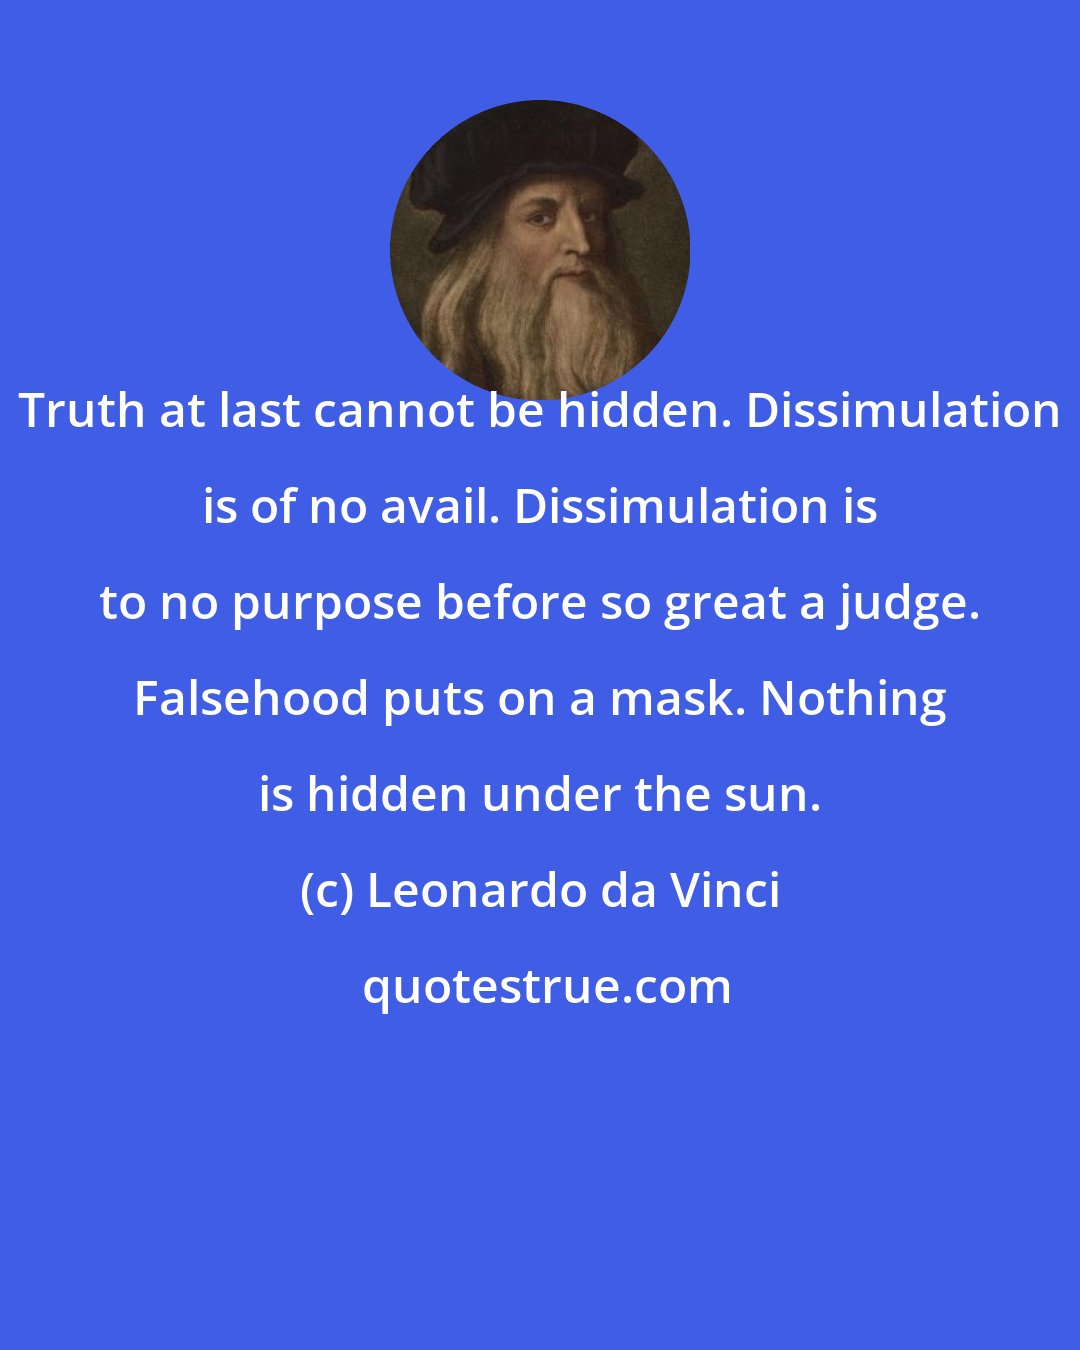 Leonardo da Vinci: Truth at last cannot be hidden. Dissimulation is of no avail. Dissimulation is to no purpose before so great a judge. Falsehood puts on a mask. Nothing is hidden under the sun.